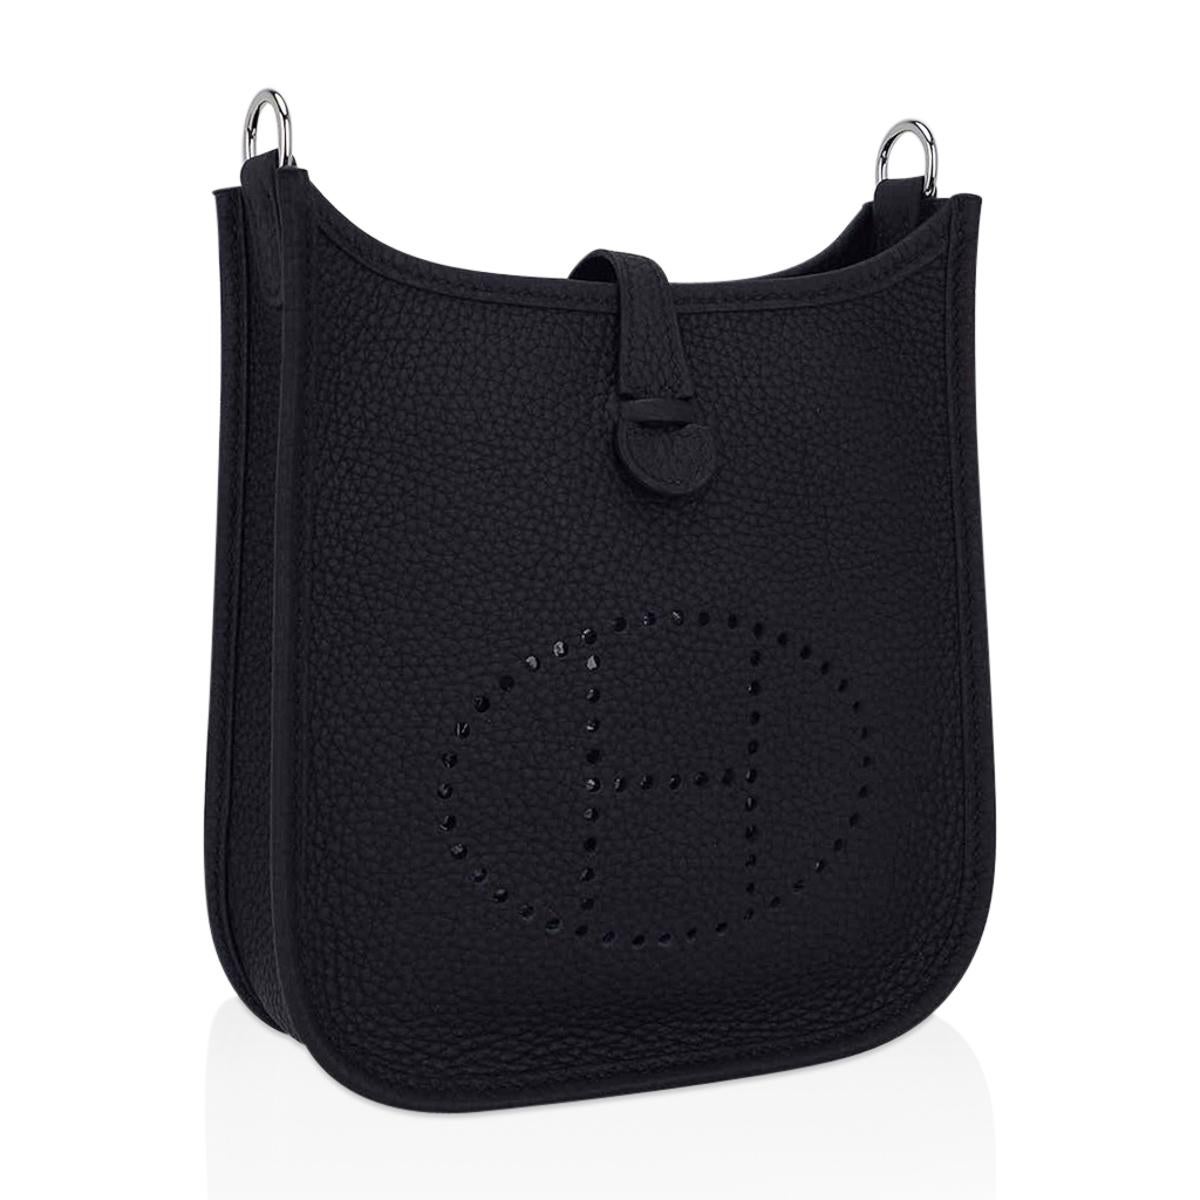 Mightychic offers an Hermes Evelyne TPM Black bag.
Cavale sport strap in Brown, Black, Blue and Ecru.
Black leather details and Palladium hardware accentuate the strap.
Clemence leather is soft and scratch resistant.
Signature perforated H on front